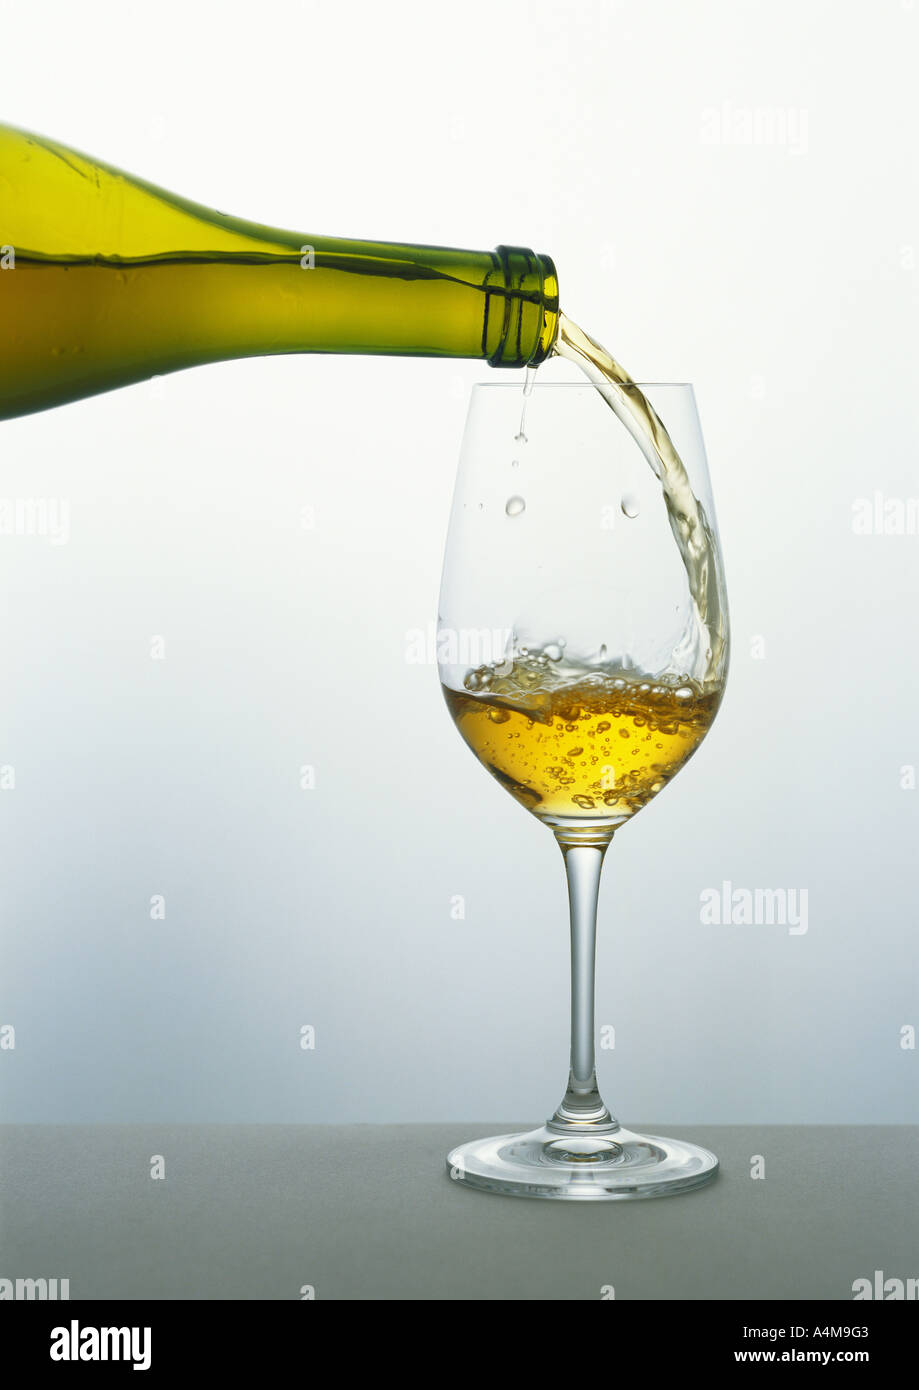 Pouring a glass of white wine Stock Photo